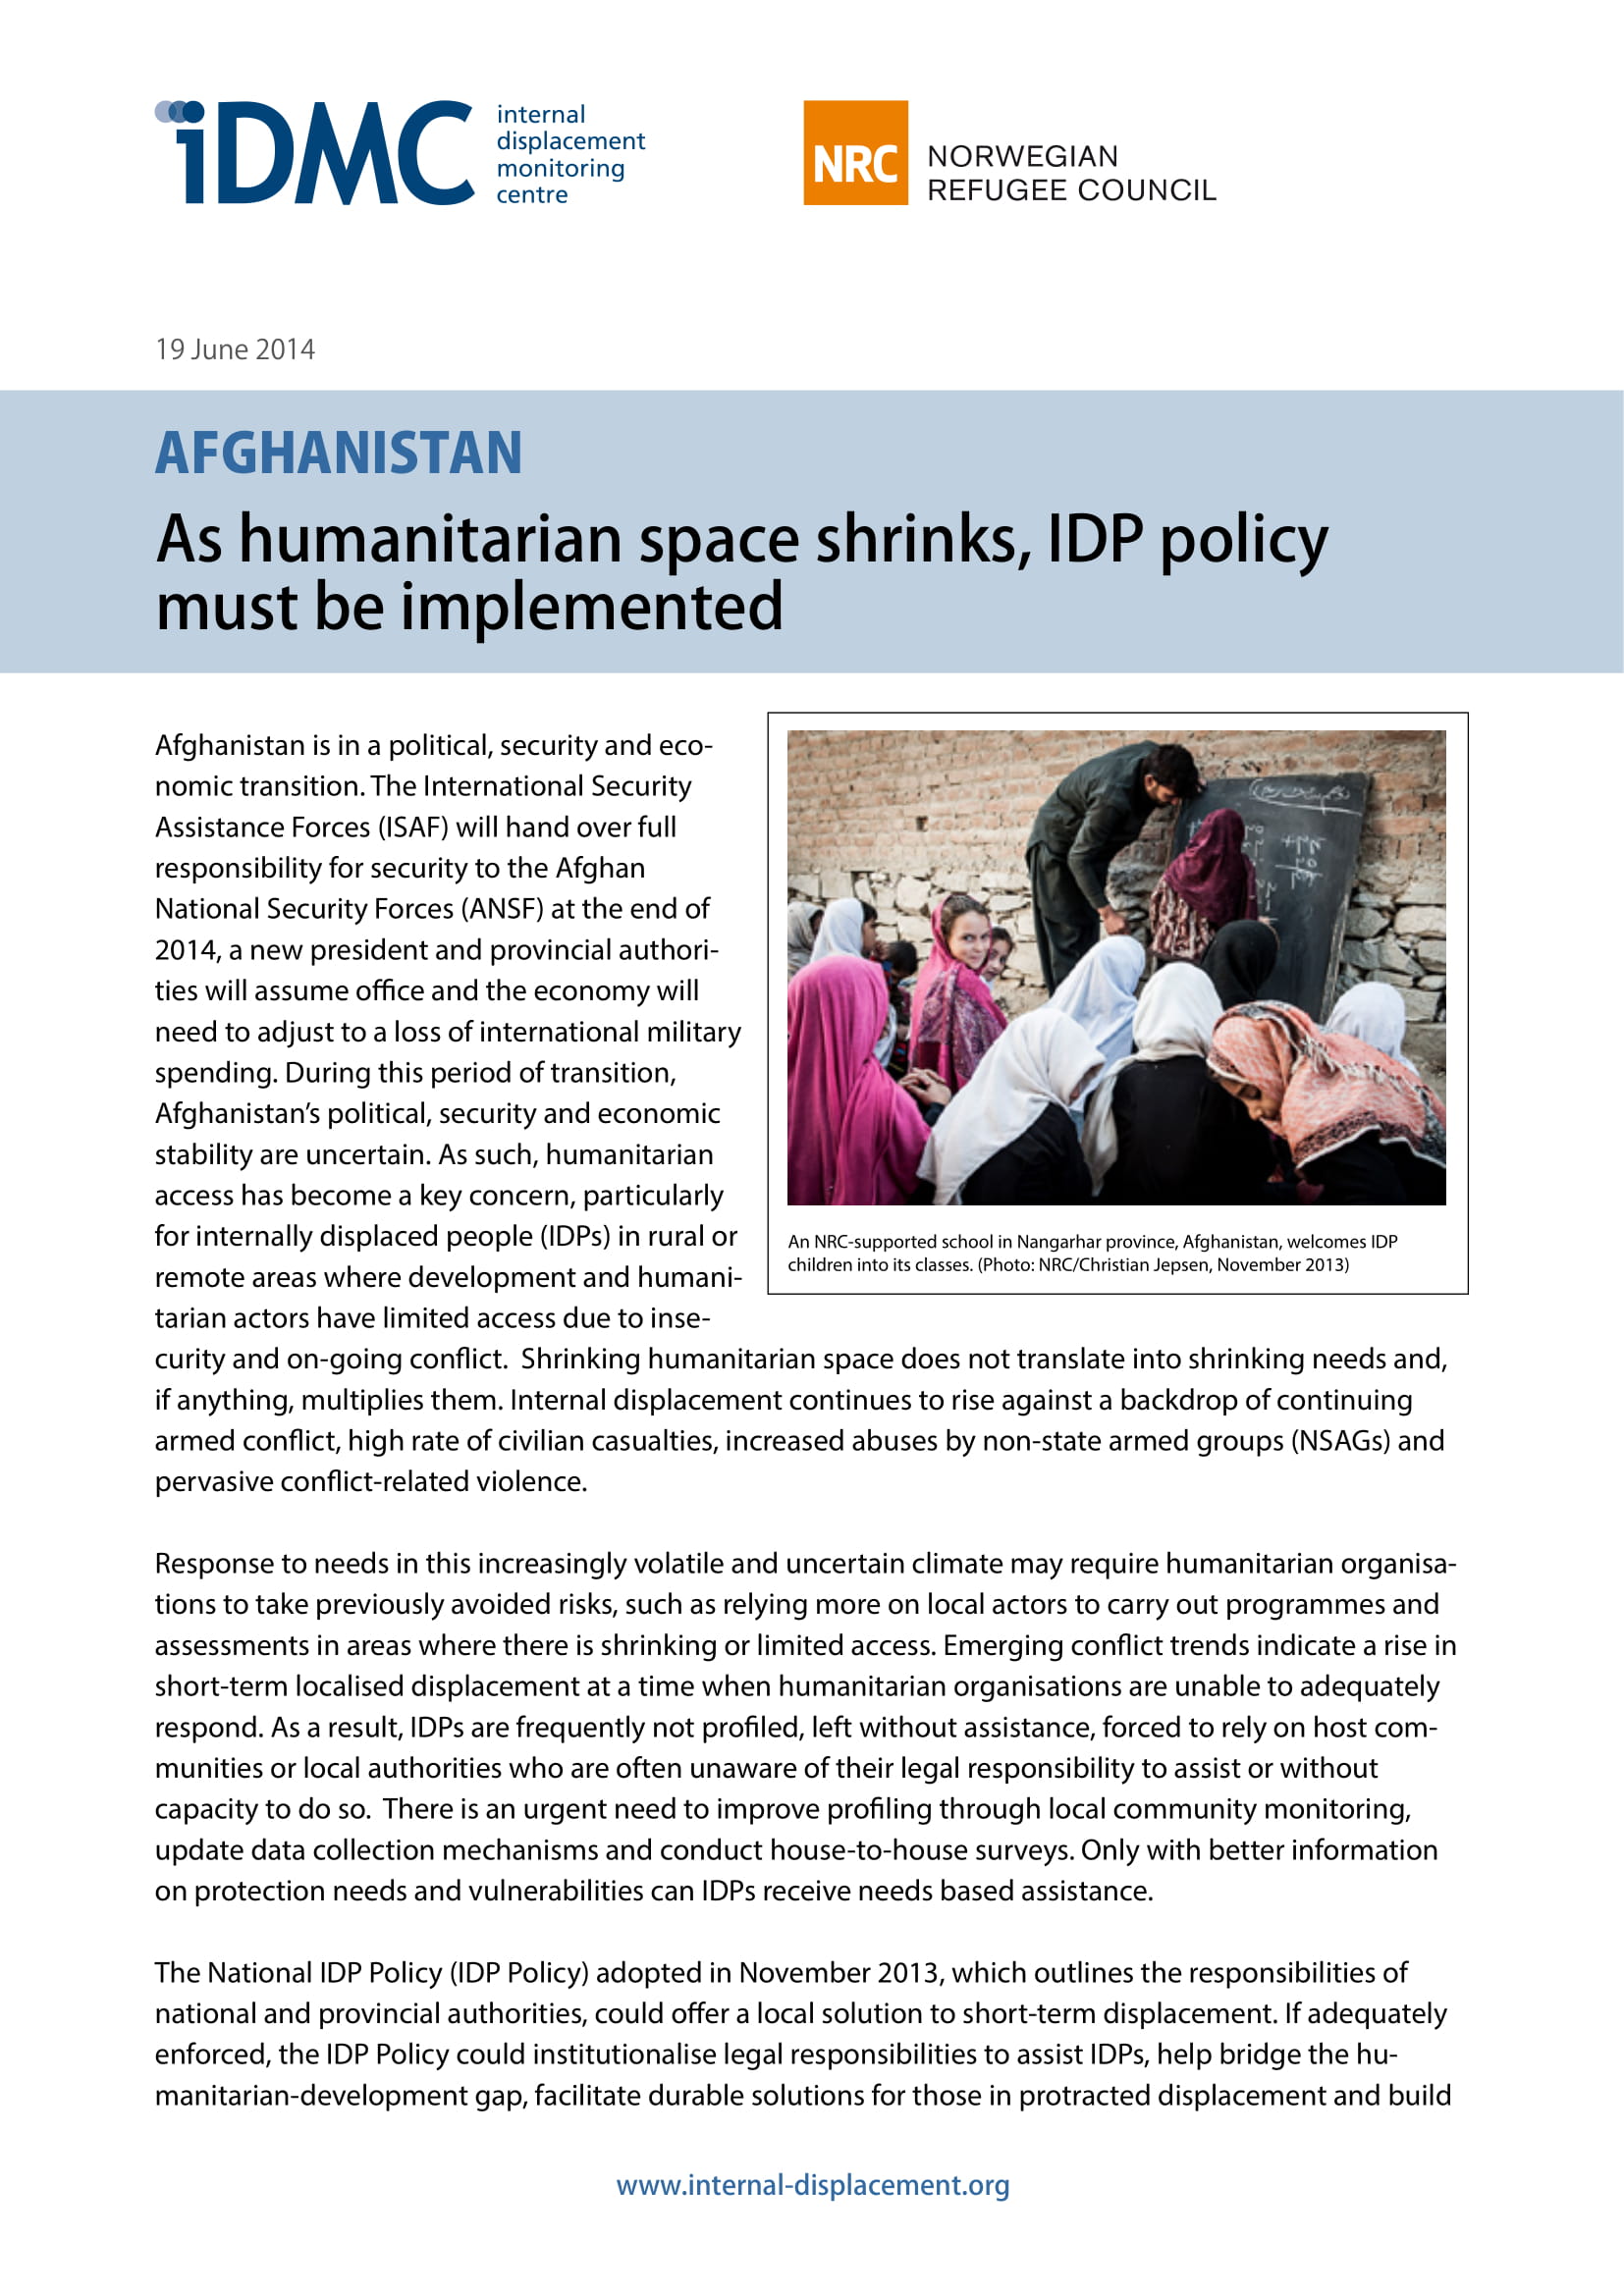 Afghanistan: As humanitarian space shrinks, IDP policy must be implemented